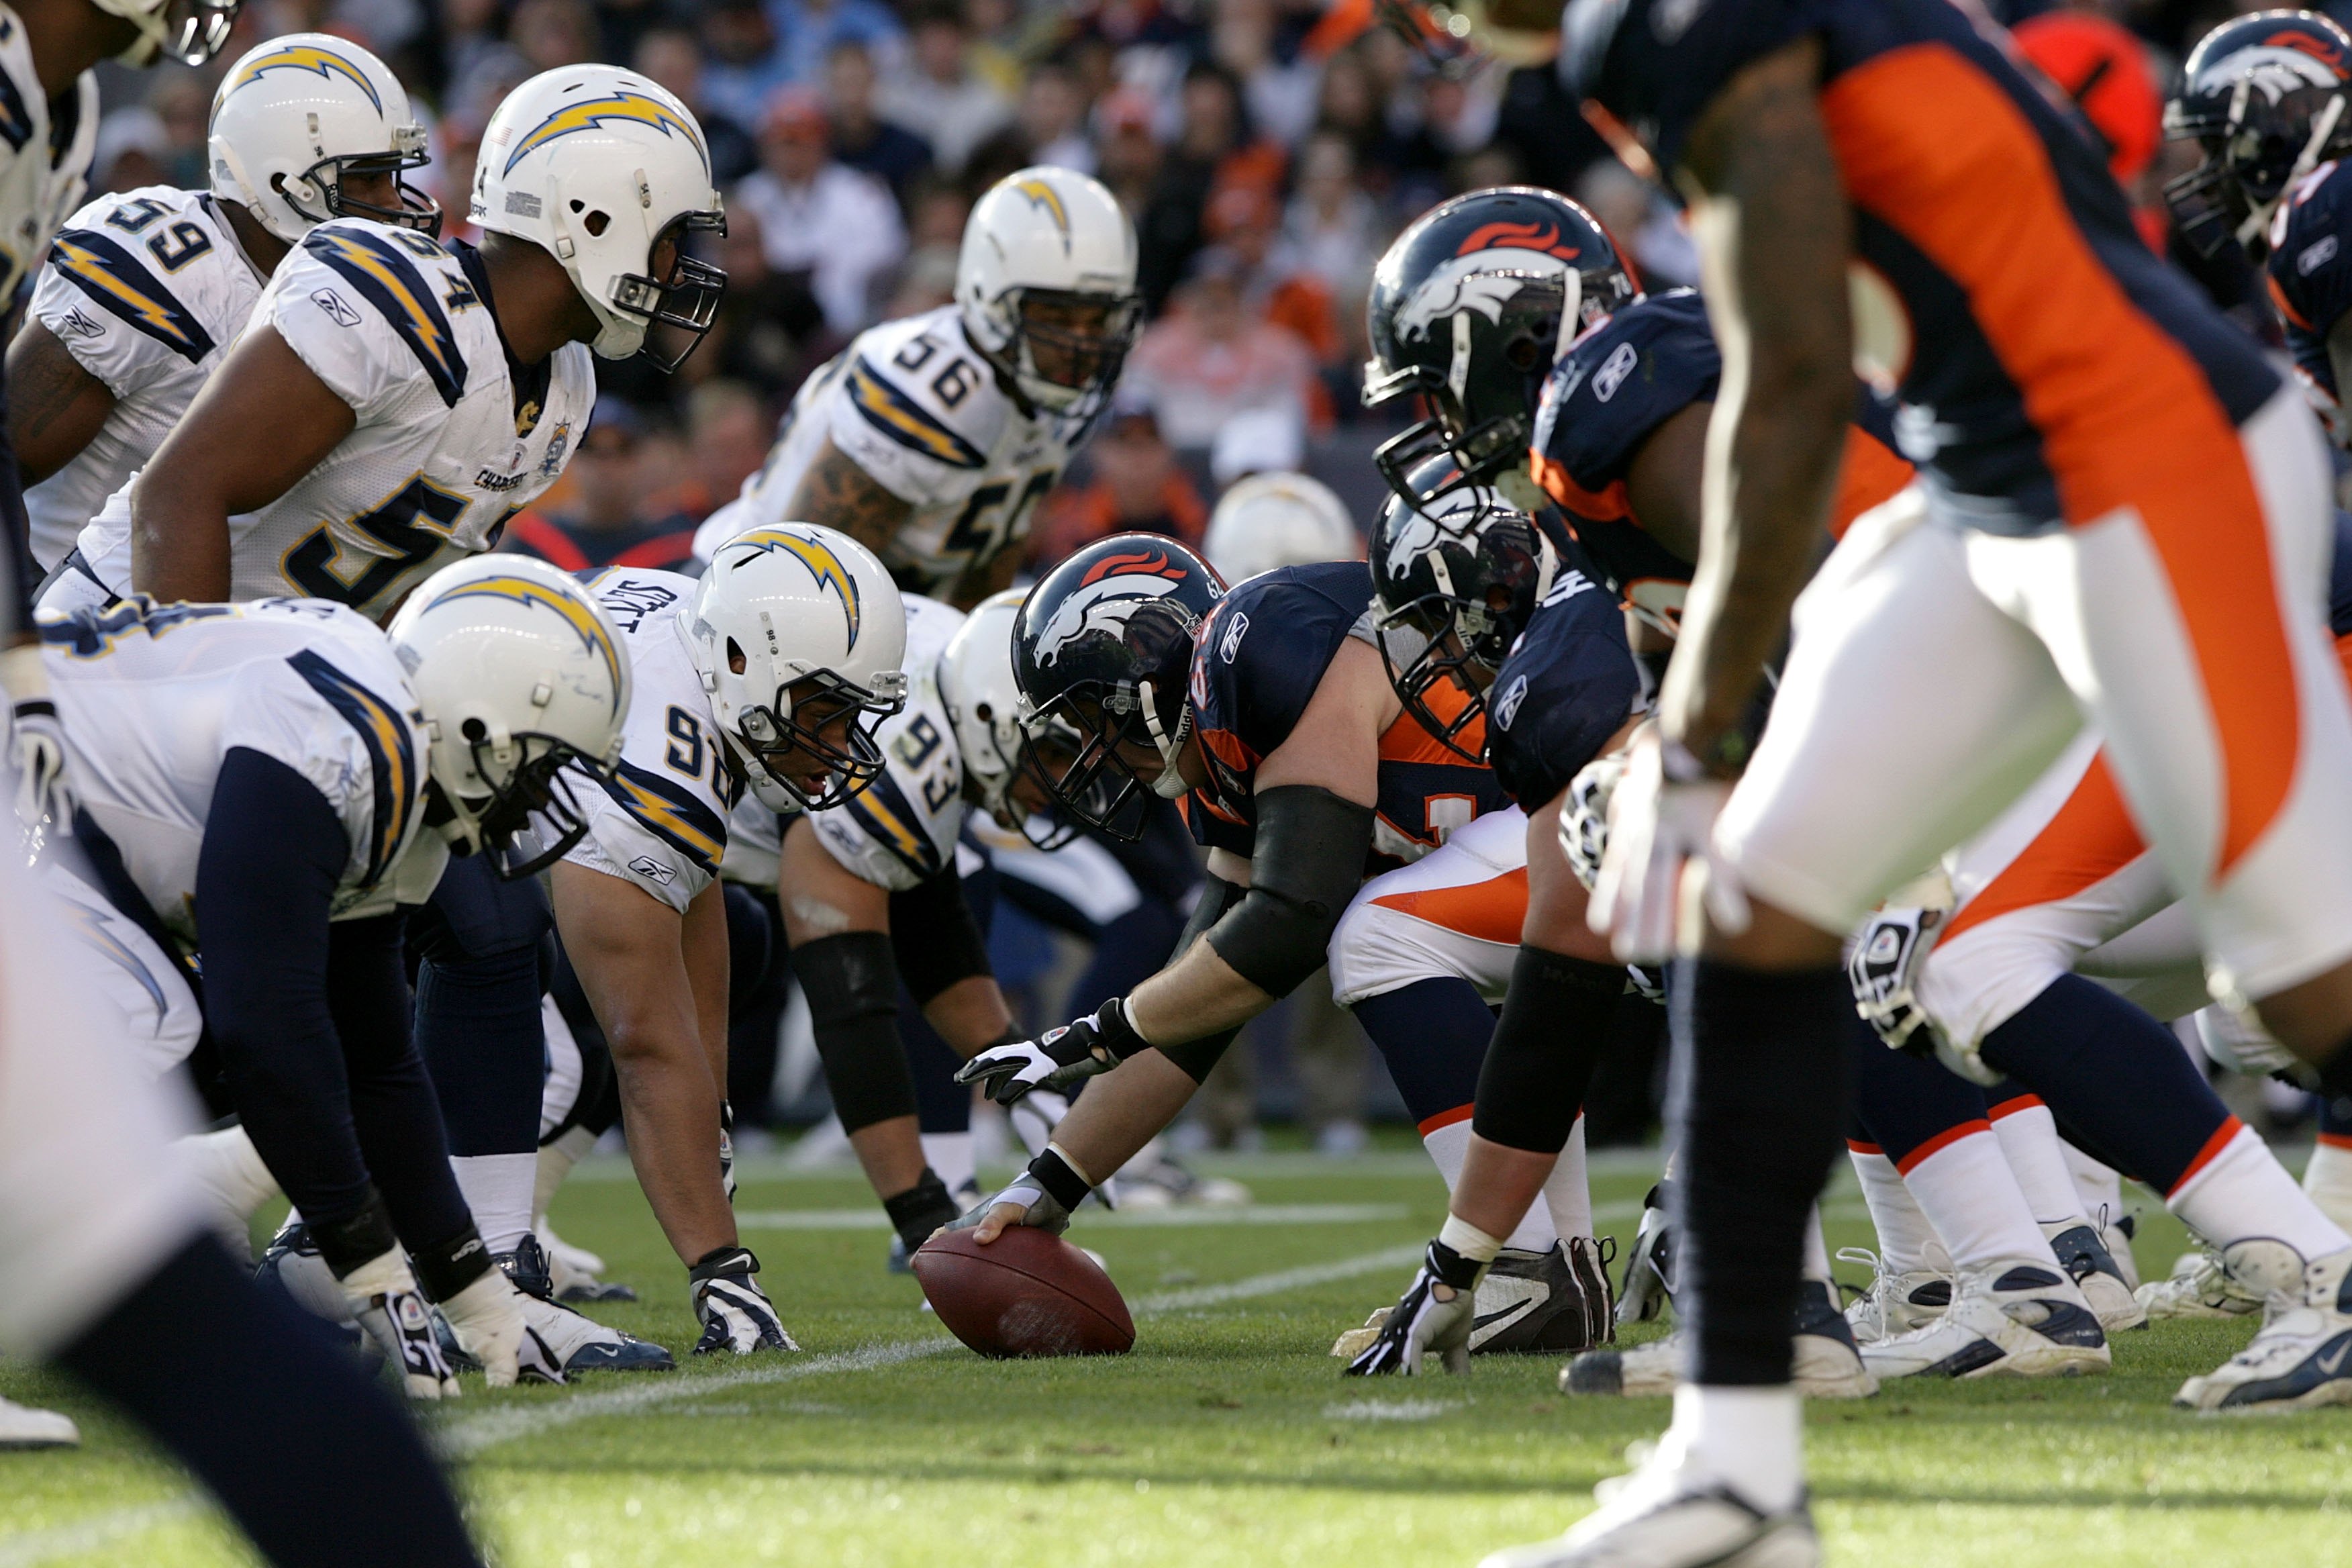 Broncos vs. Chargers: 10 Bold Predictions for Monday Night